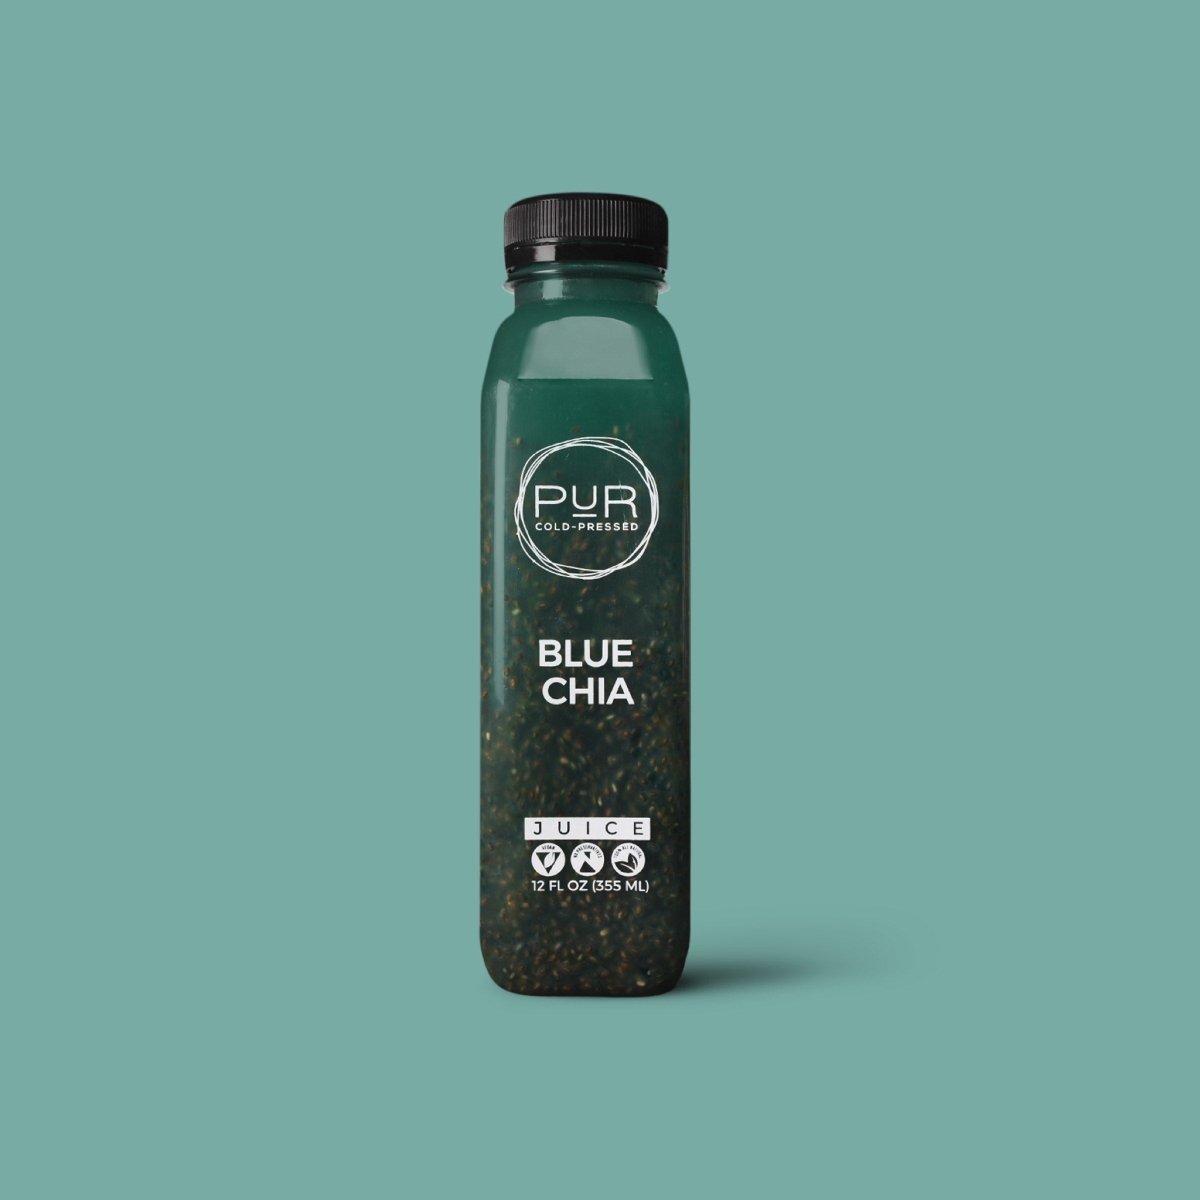 Mini Harmony Cleanse Cold Pressed Juice - PUR Cold Pressed Juice - Almond Milks - Assist Weight Loss - athlete-yes - Cleanse